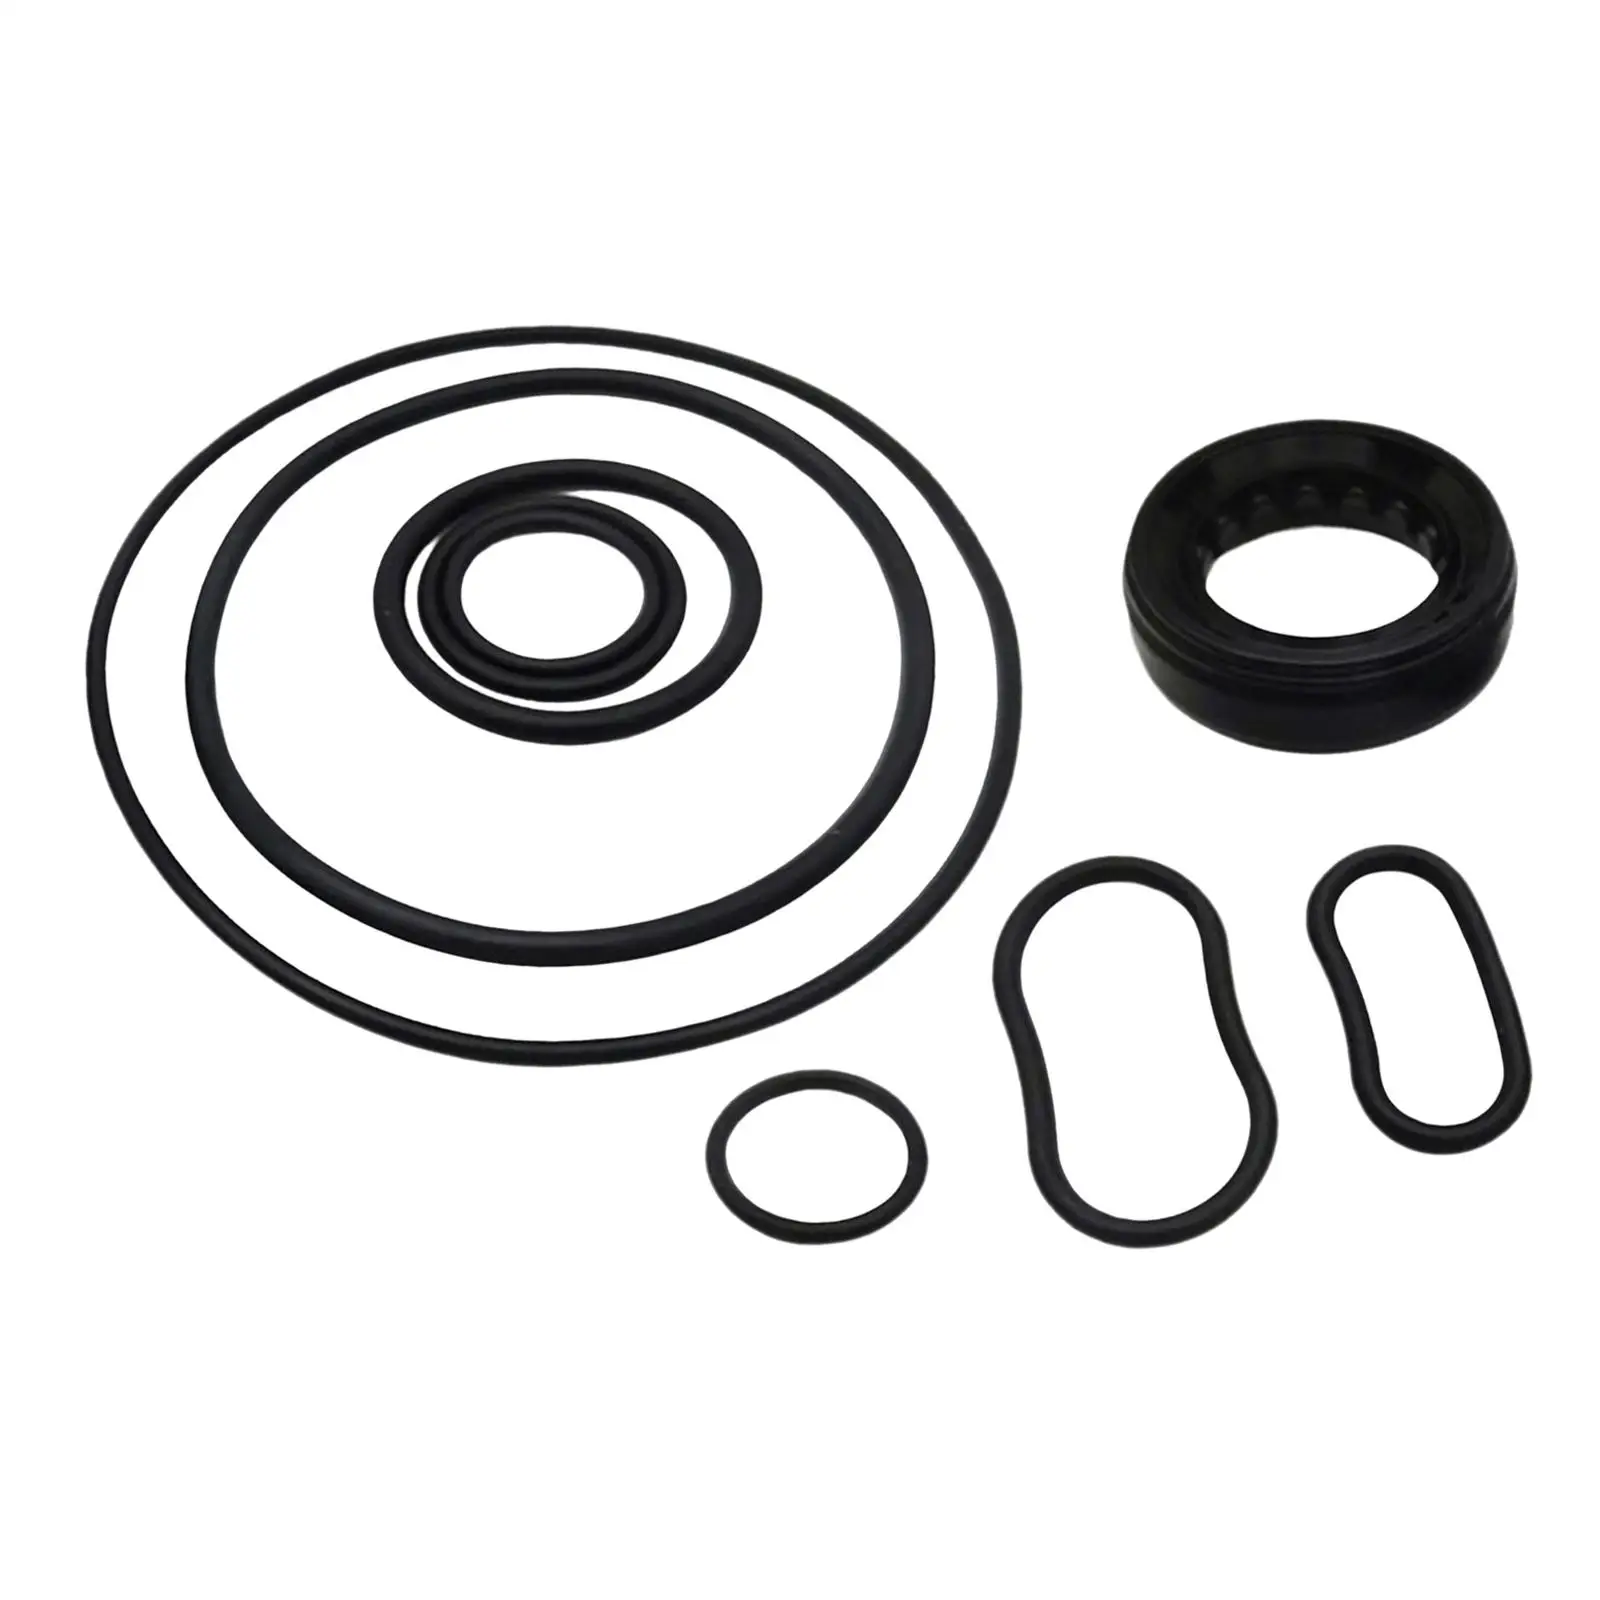 Power Steering Pump Seal 06539-Pnc-003 Direct Replacement Professional Car Assembly Accessories with O Rings Vehicle Parts